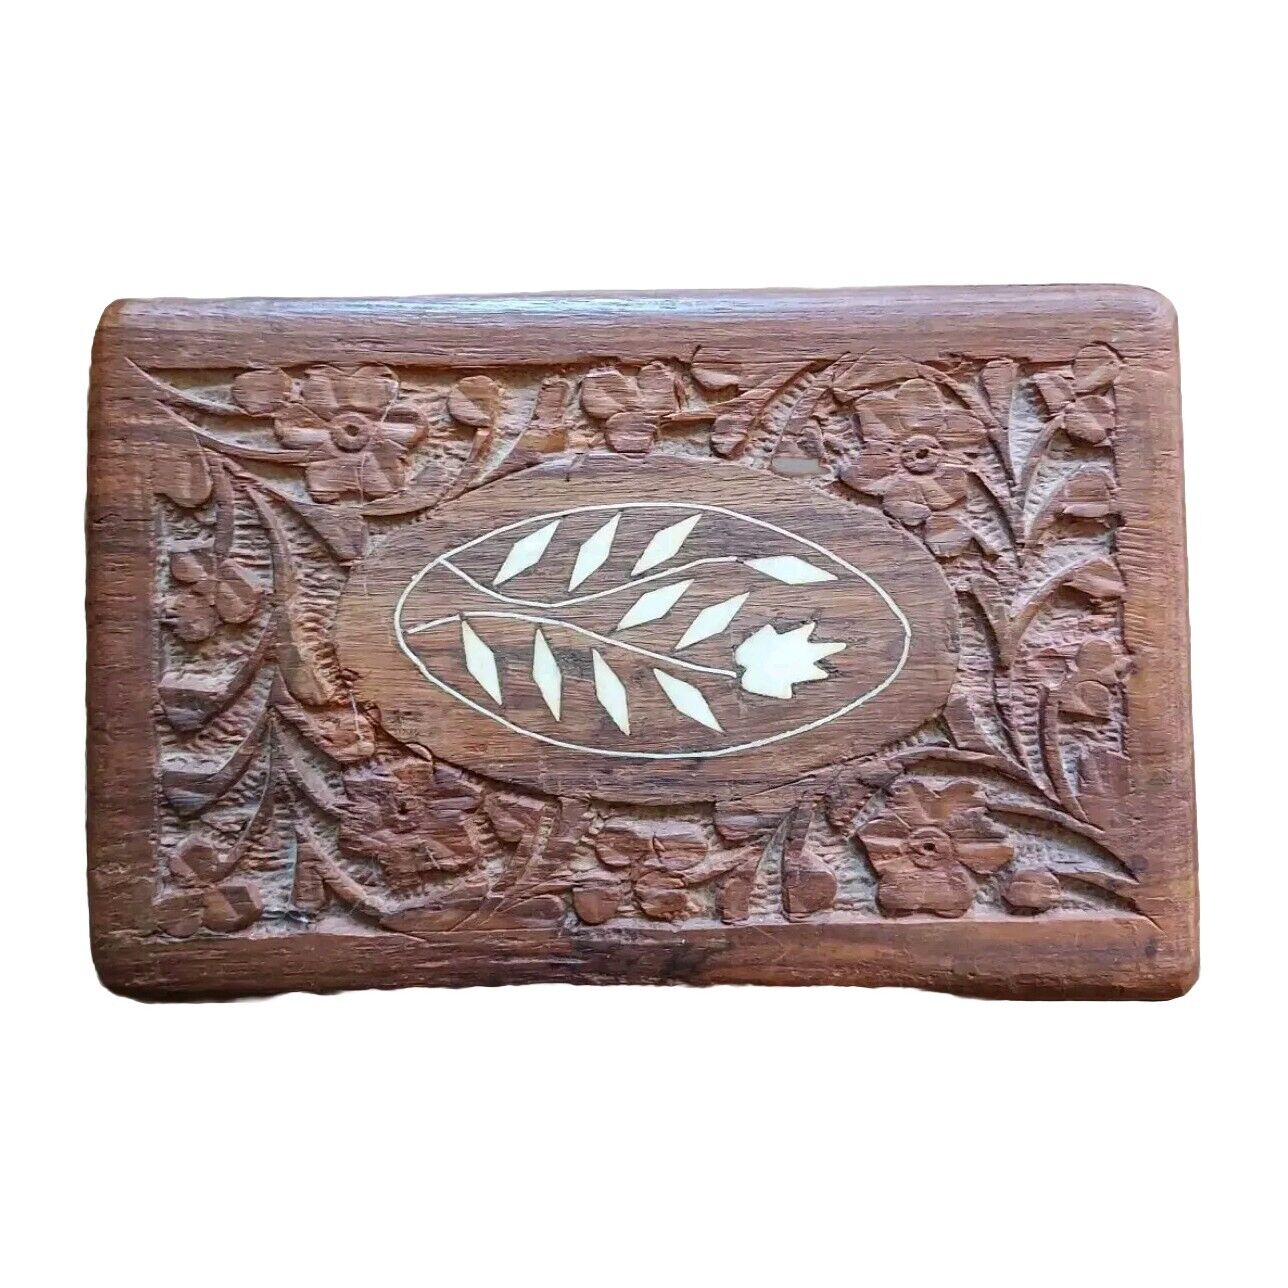 Vintage Hand Carved Wooden Hinged Box For Trinkets, Jewelry or Keepsakes. 